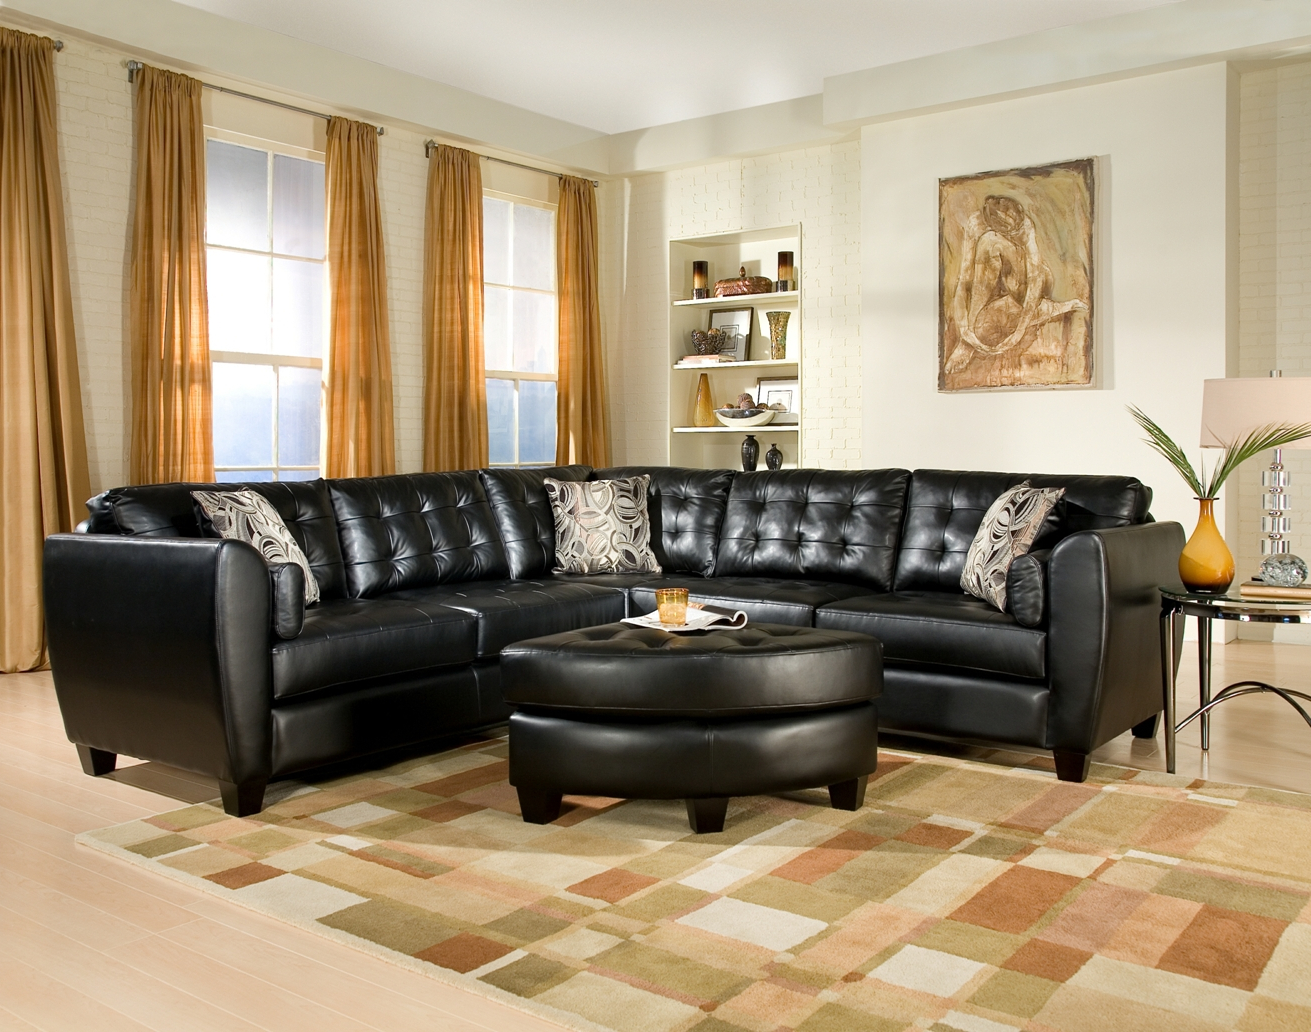 Small Living Room Ideas With Black Sofa